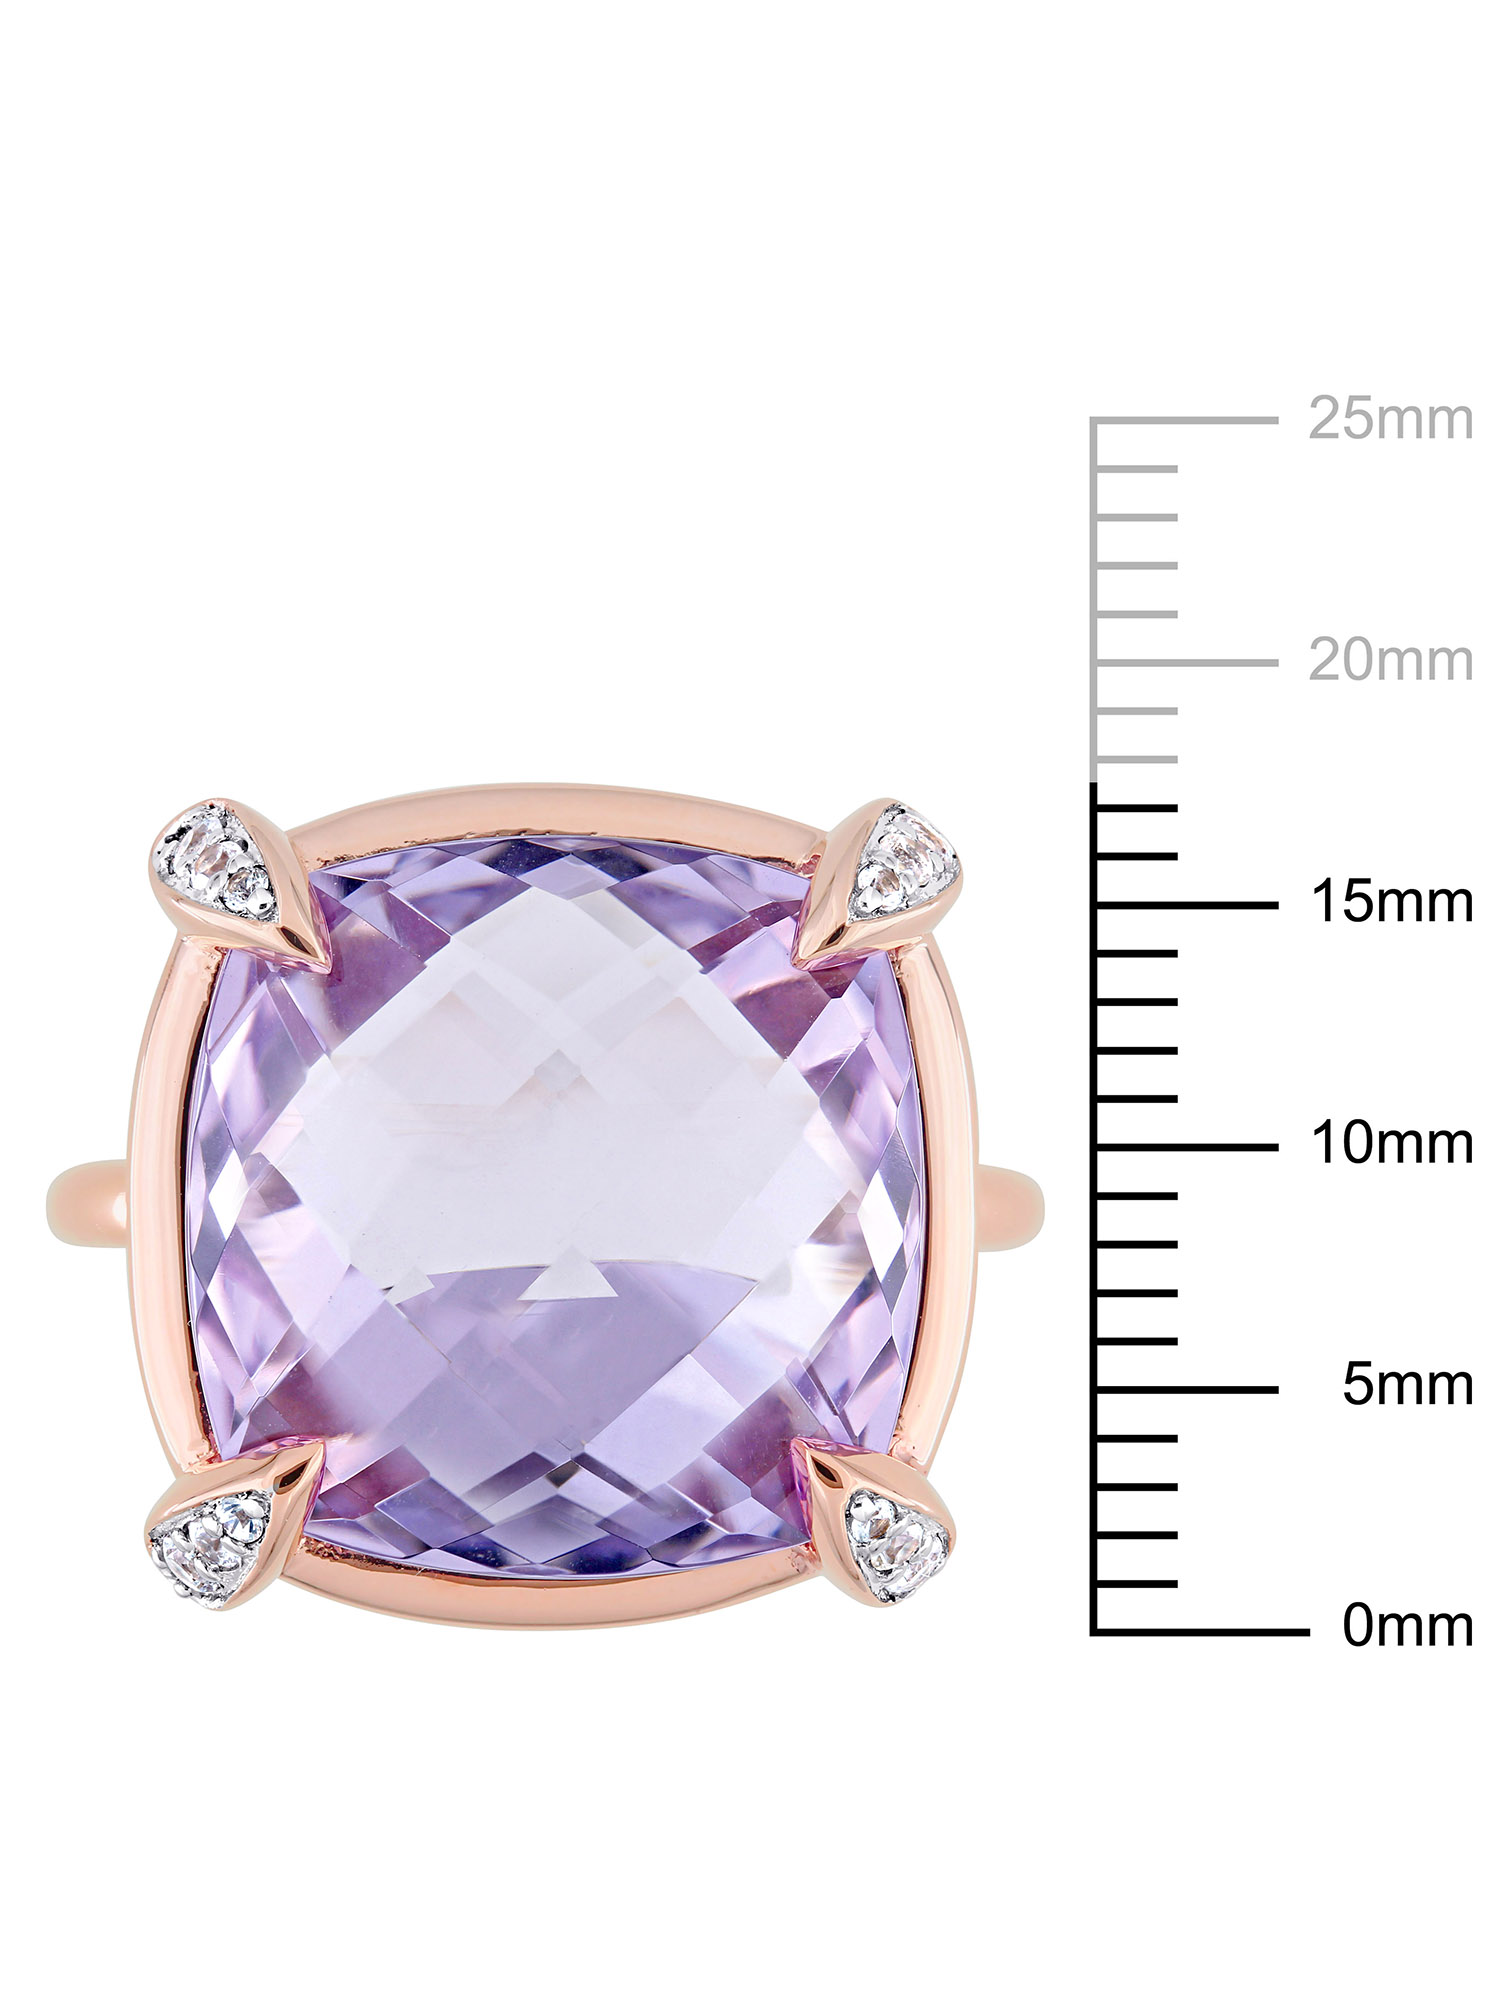 15-1/8 Carat T.G.W. Rose de France and White Sapphire 14kt Rose Gold Cocktail Ring - image 2 of 7